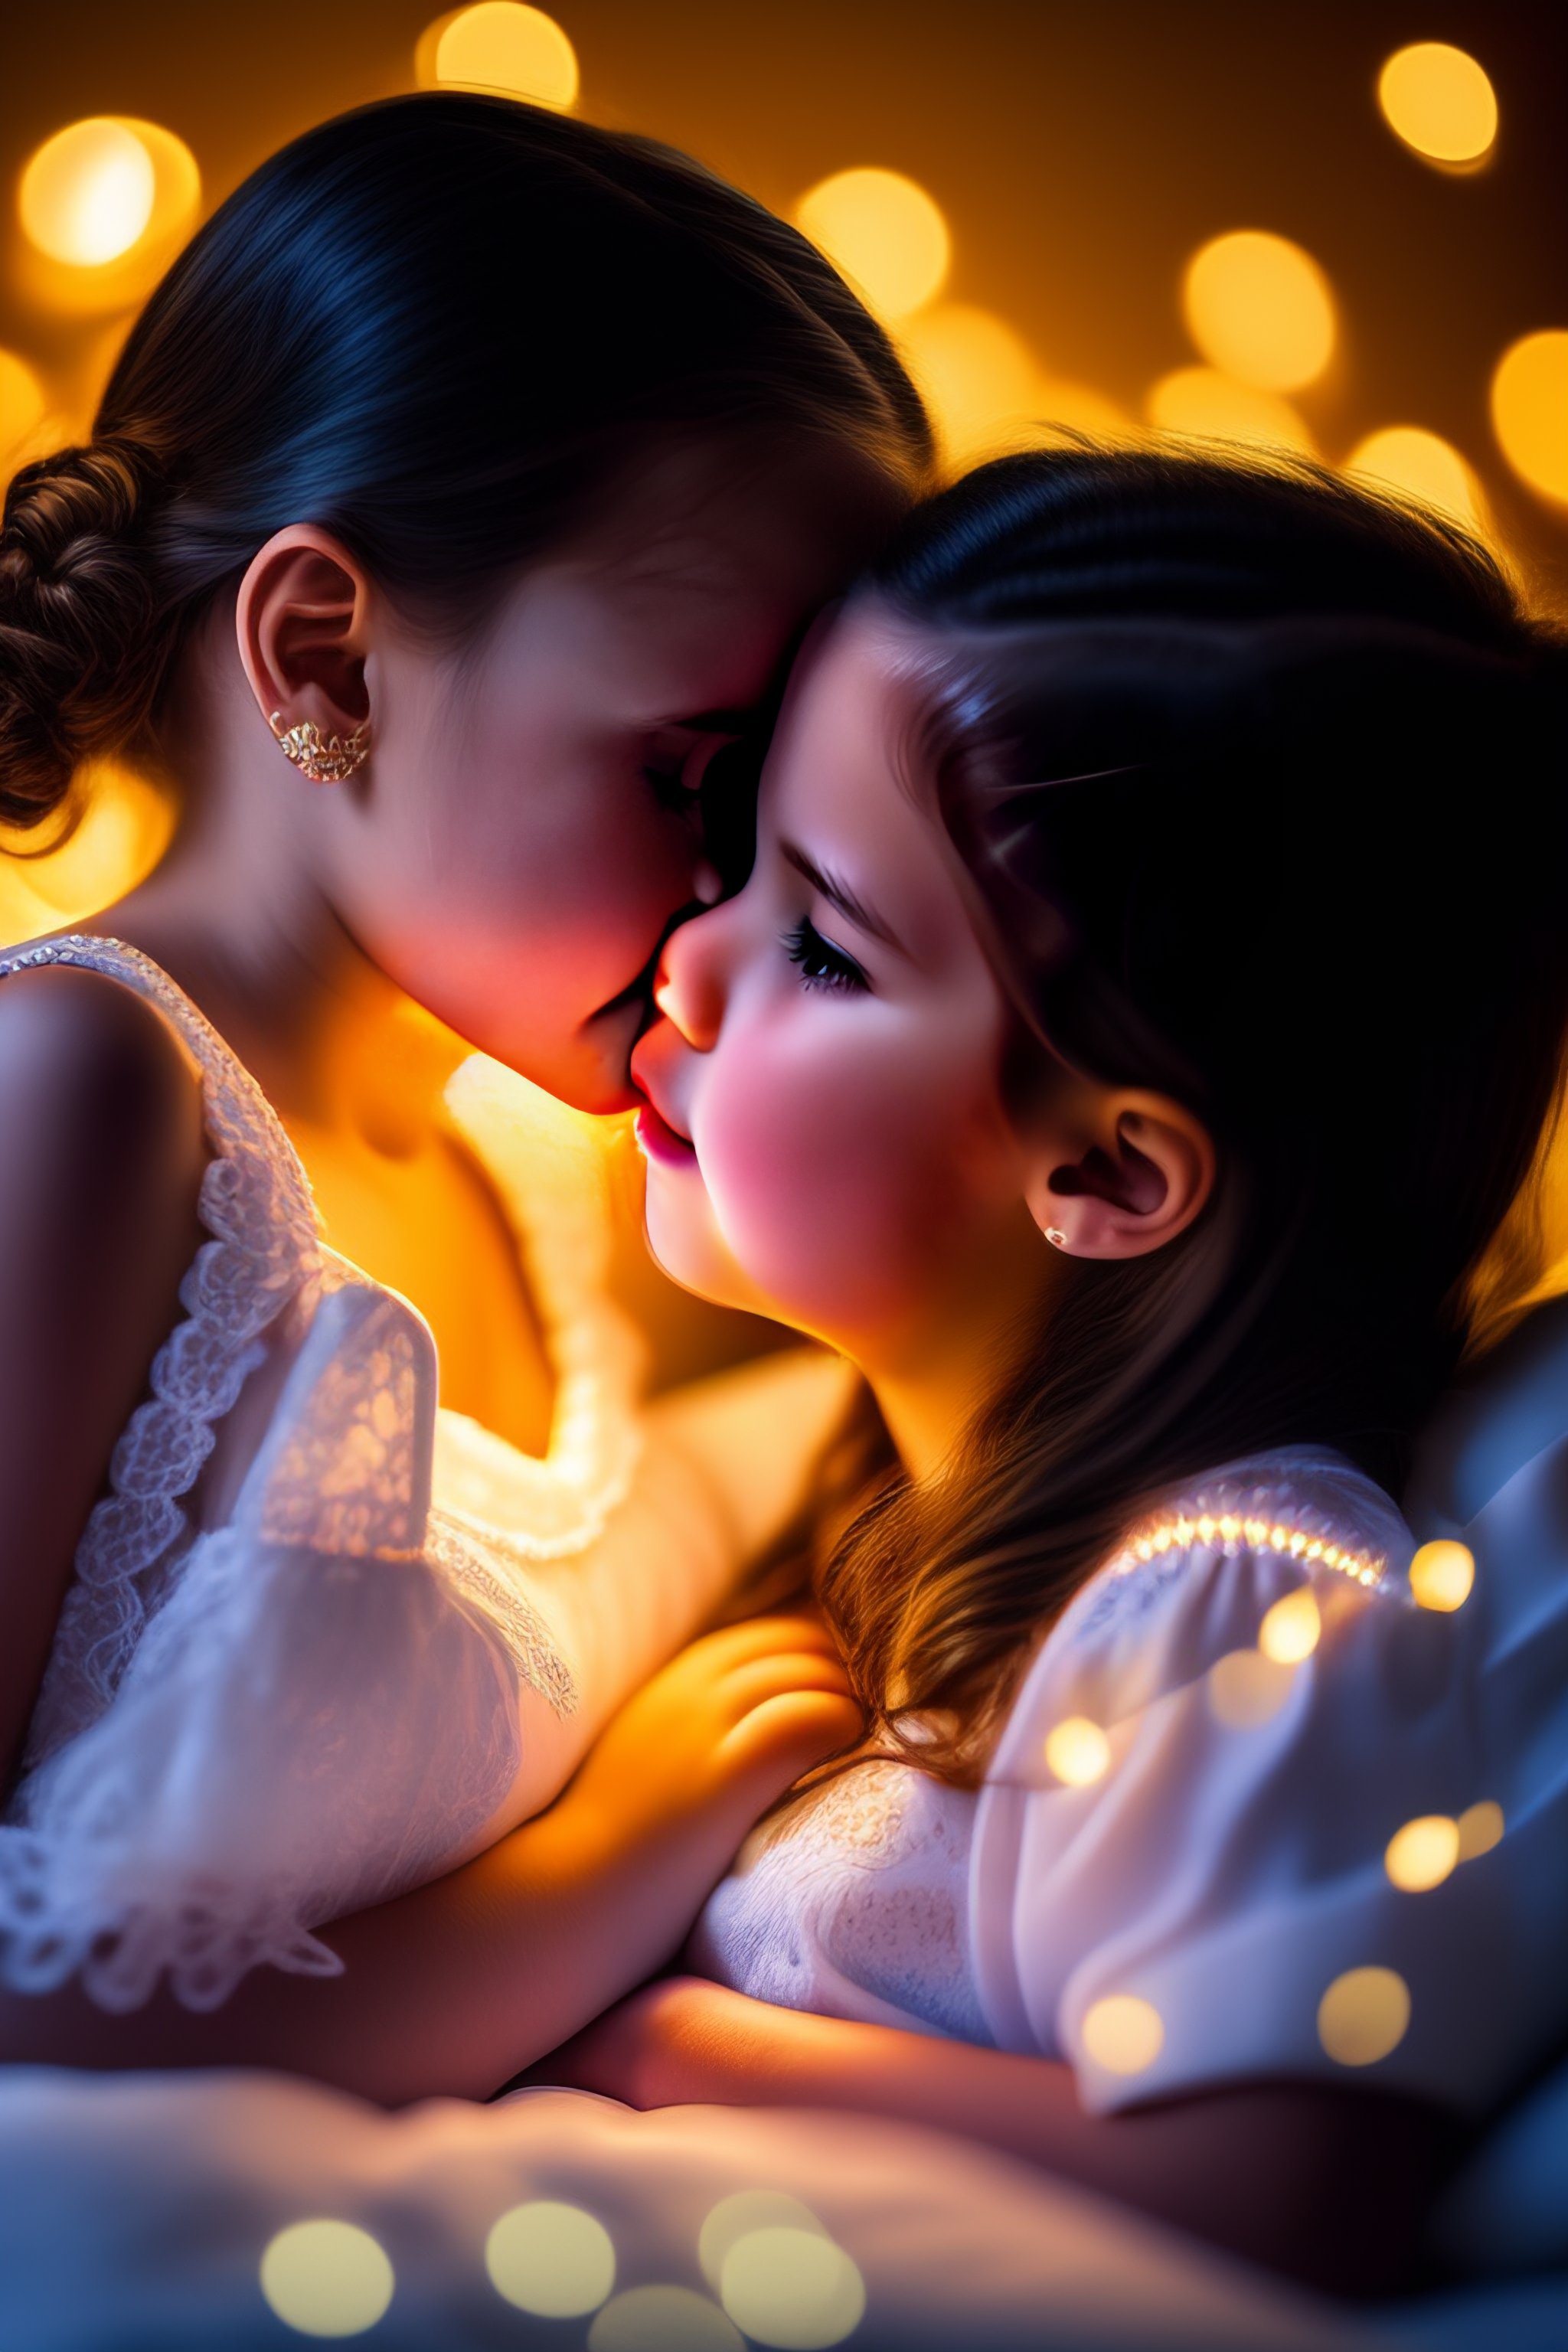 Lexica Beautiful Photo Realistic Picture Of Two Ten Year Old Girls Kissing And In Bed